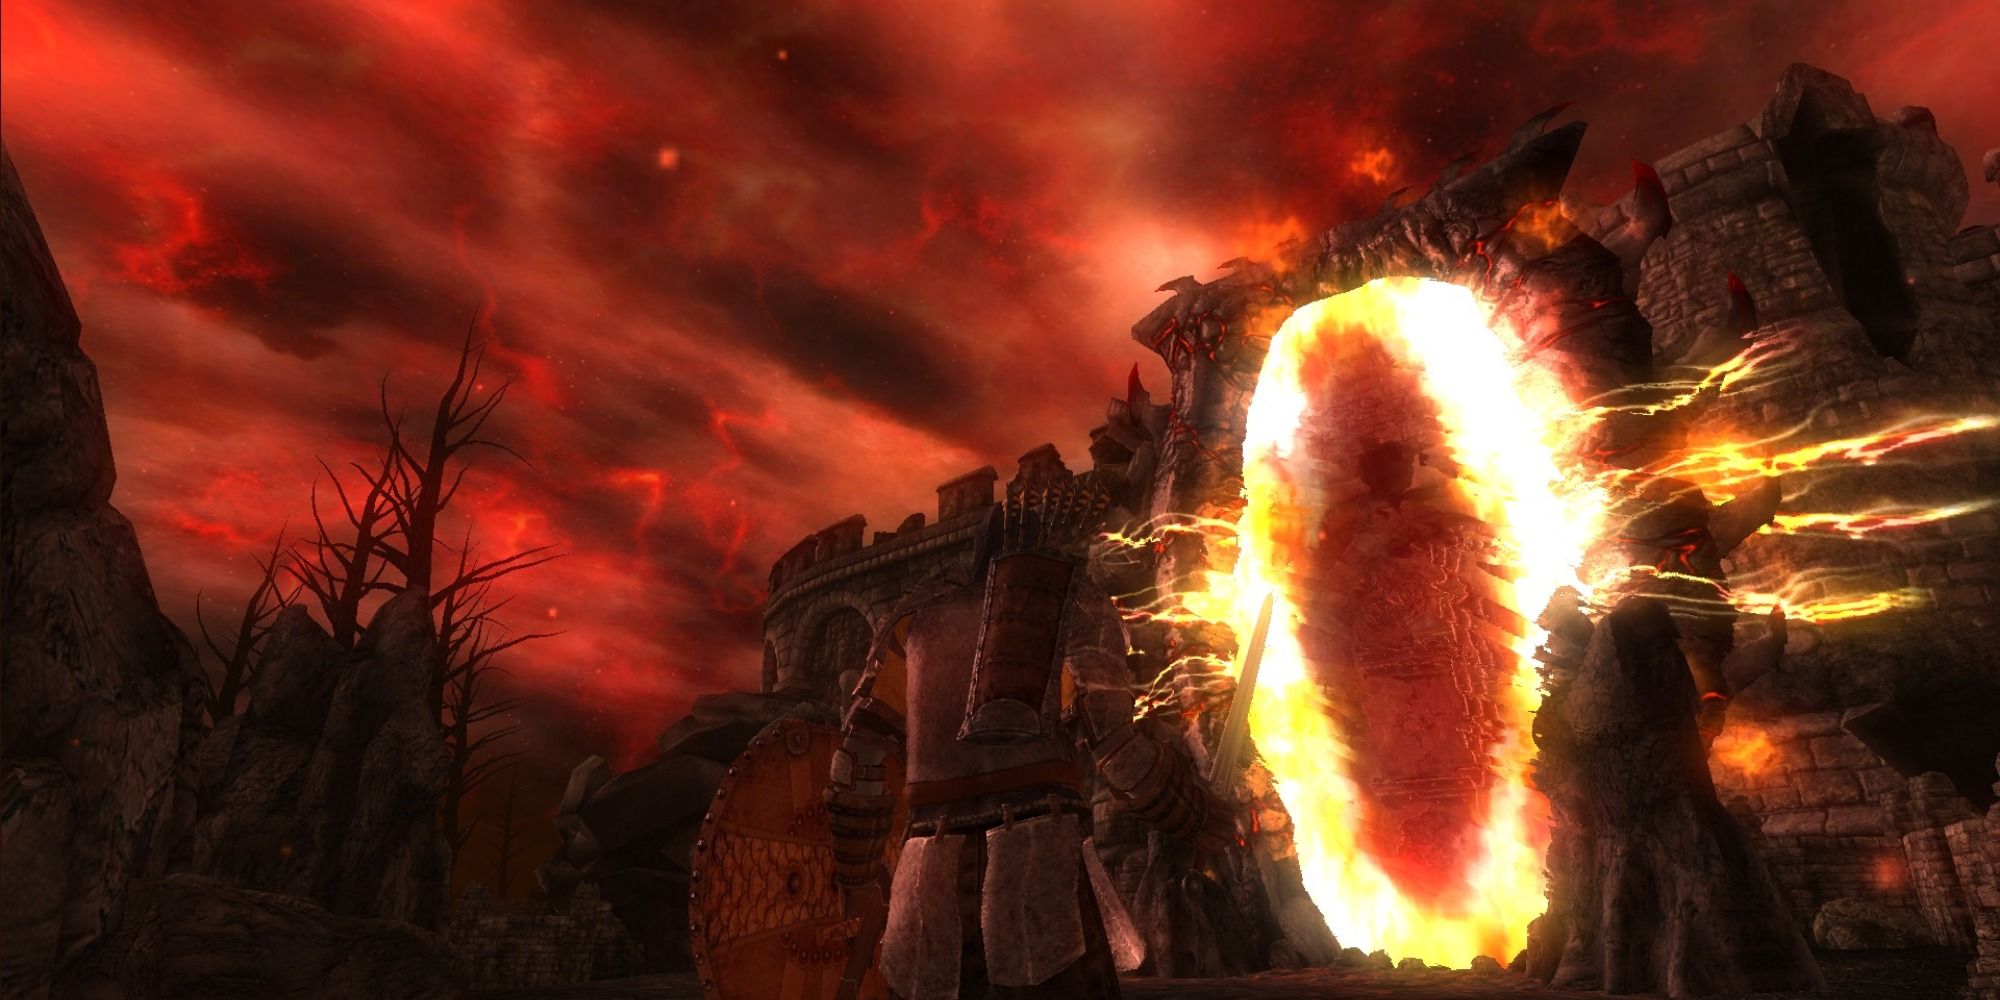 The Oblivion Gate that opened at Kvatch